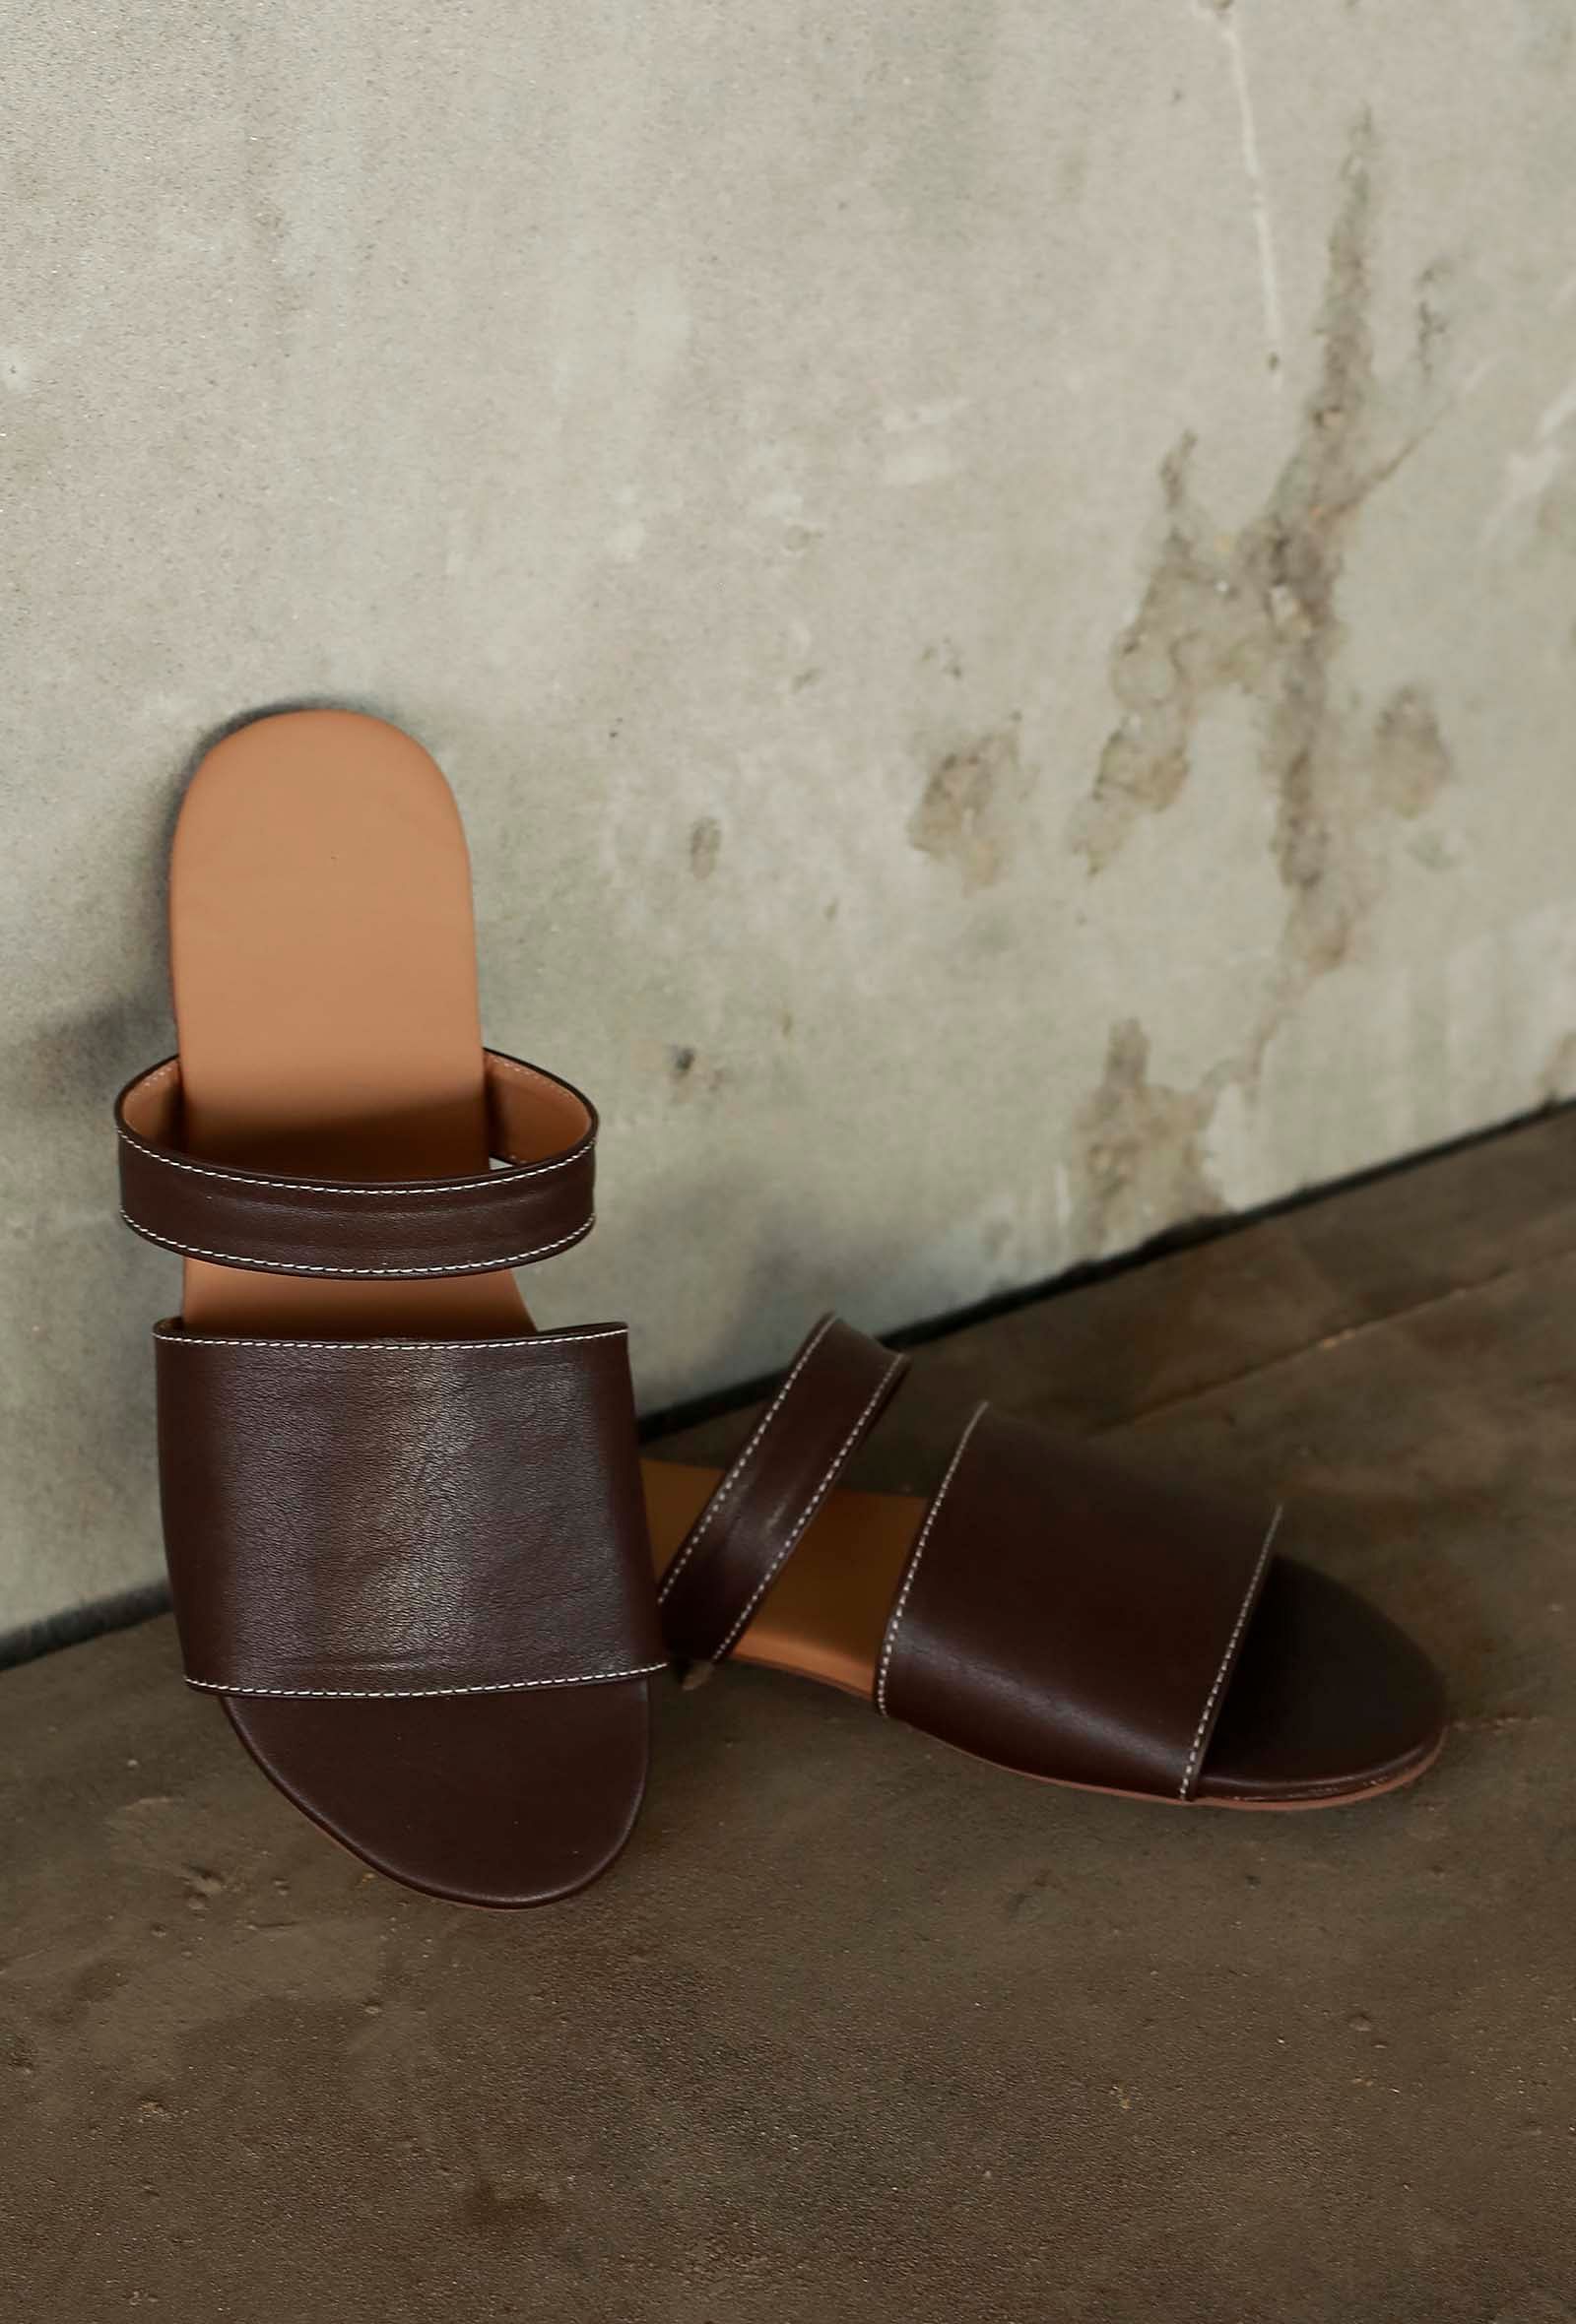 Brunette Brown Cruelty Free Leather Sliders